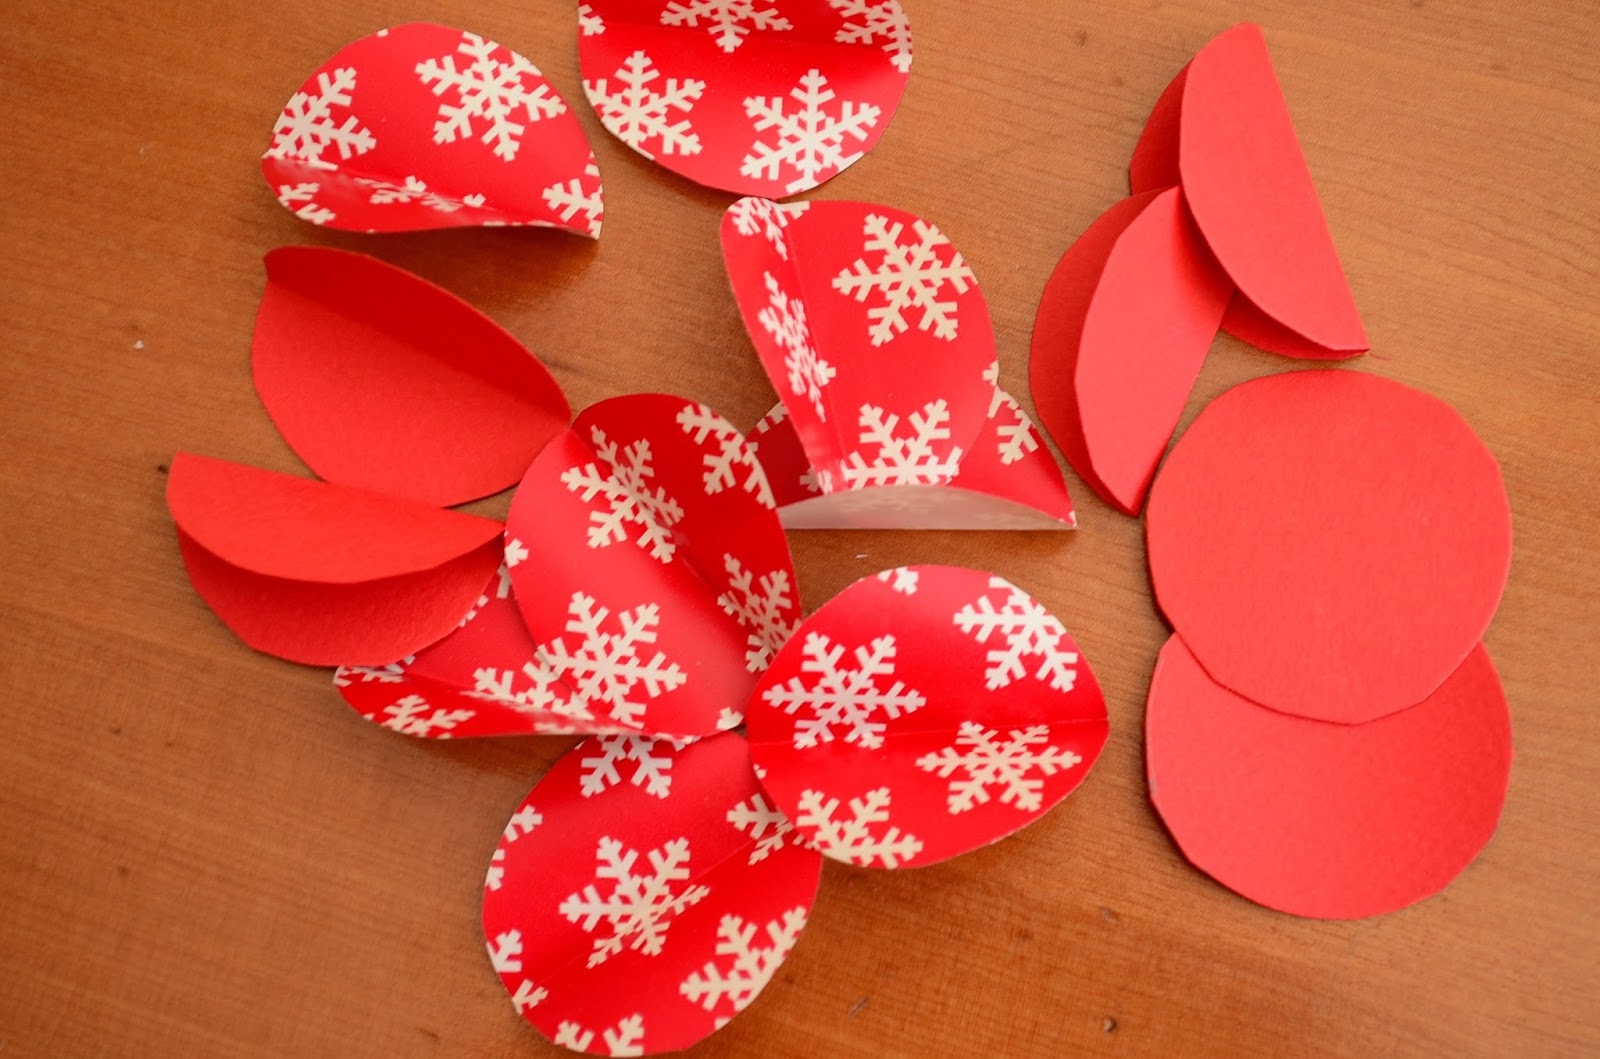 The Practical Mom: DIY Christmas Paper Baubles